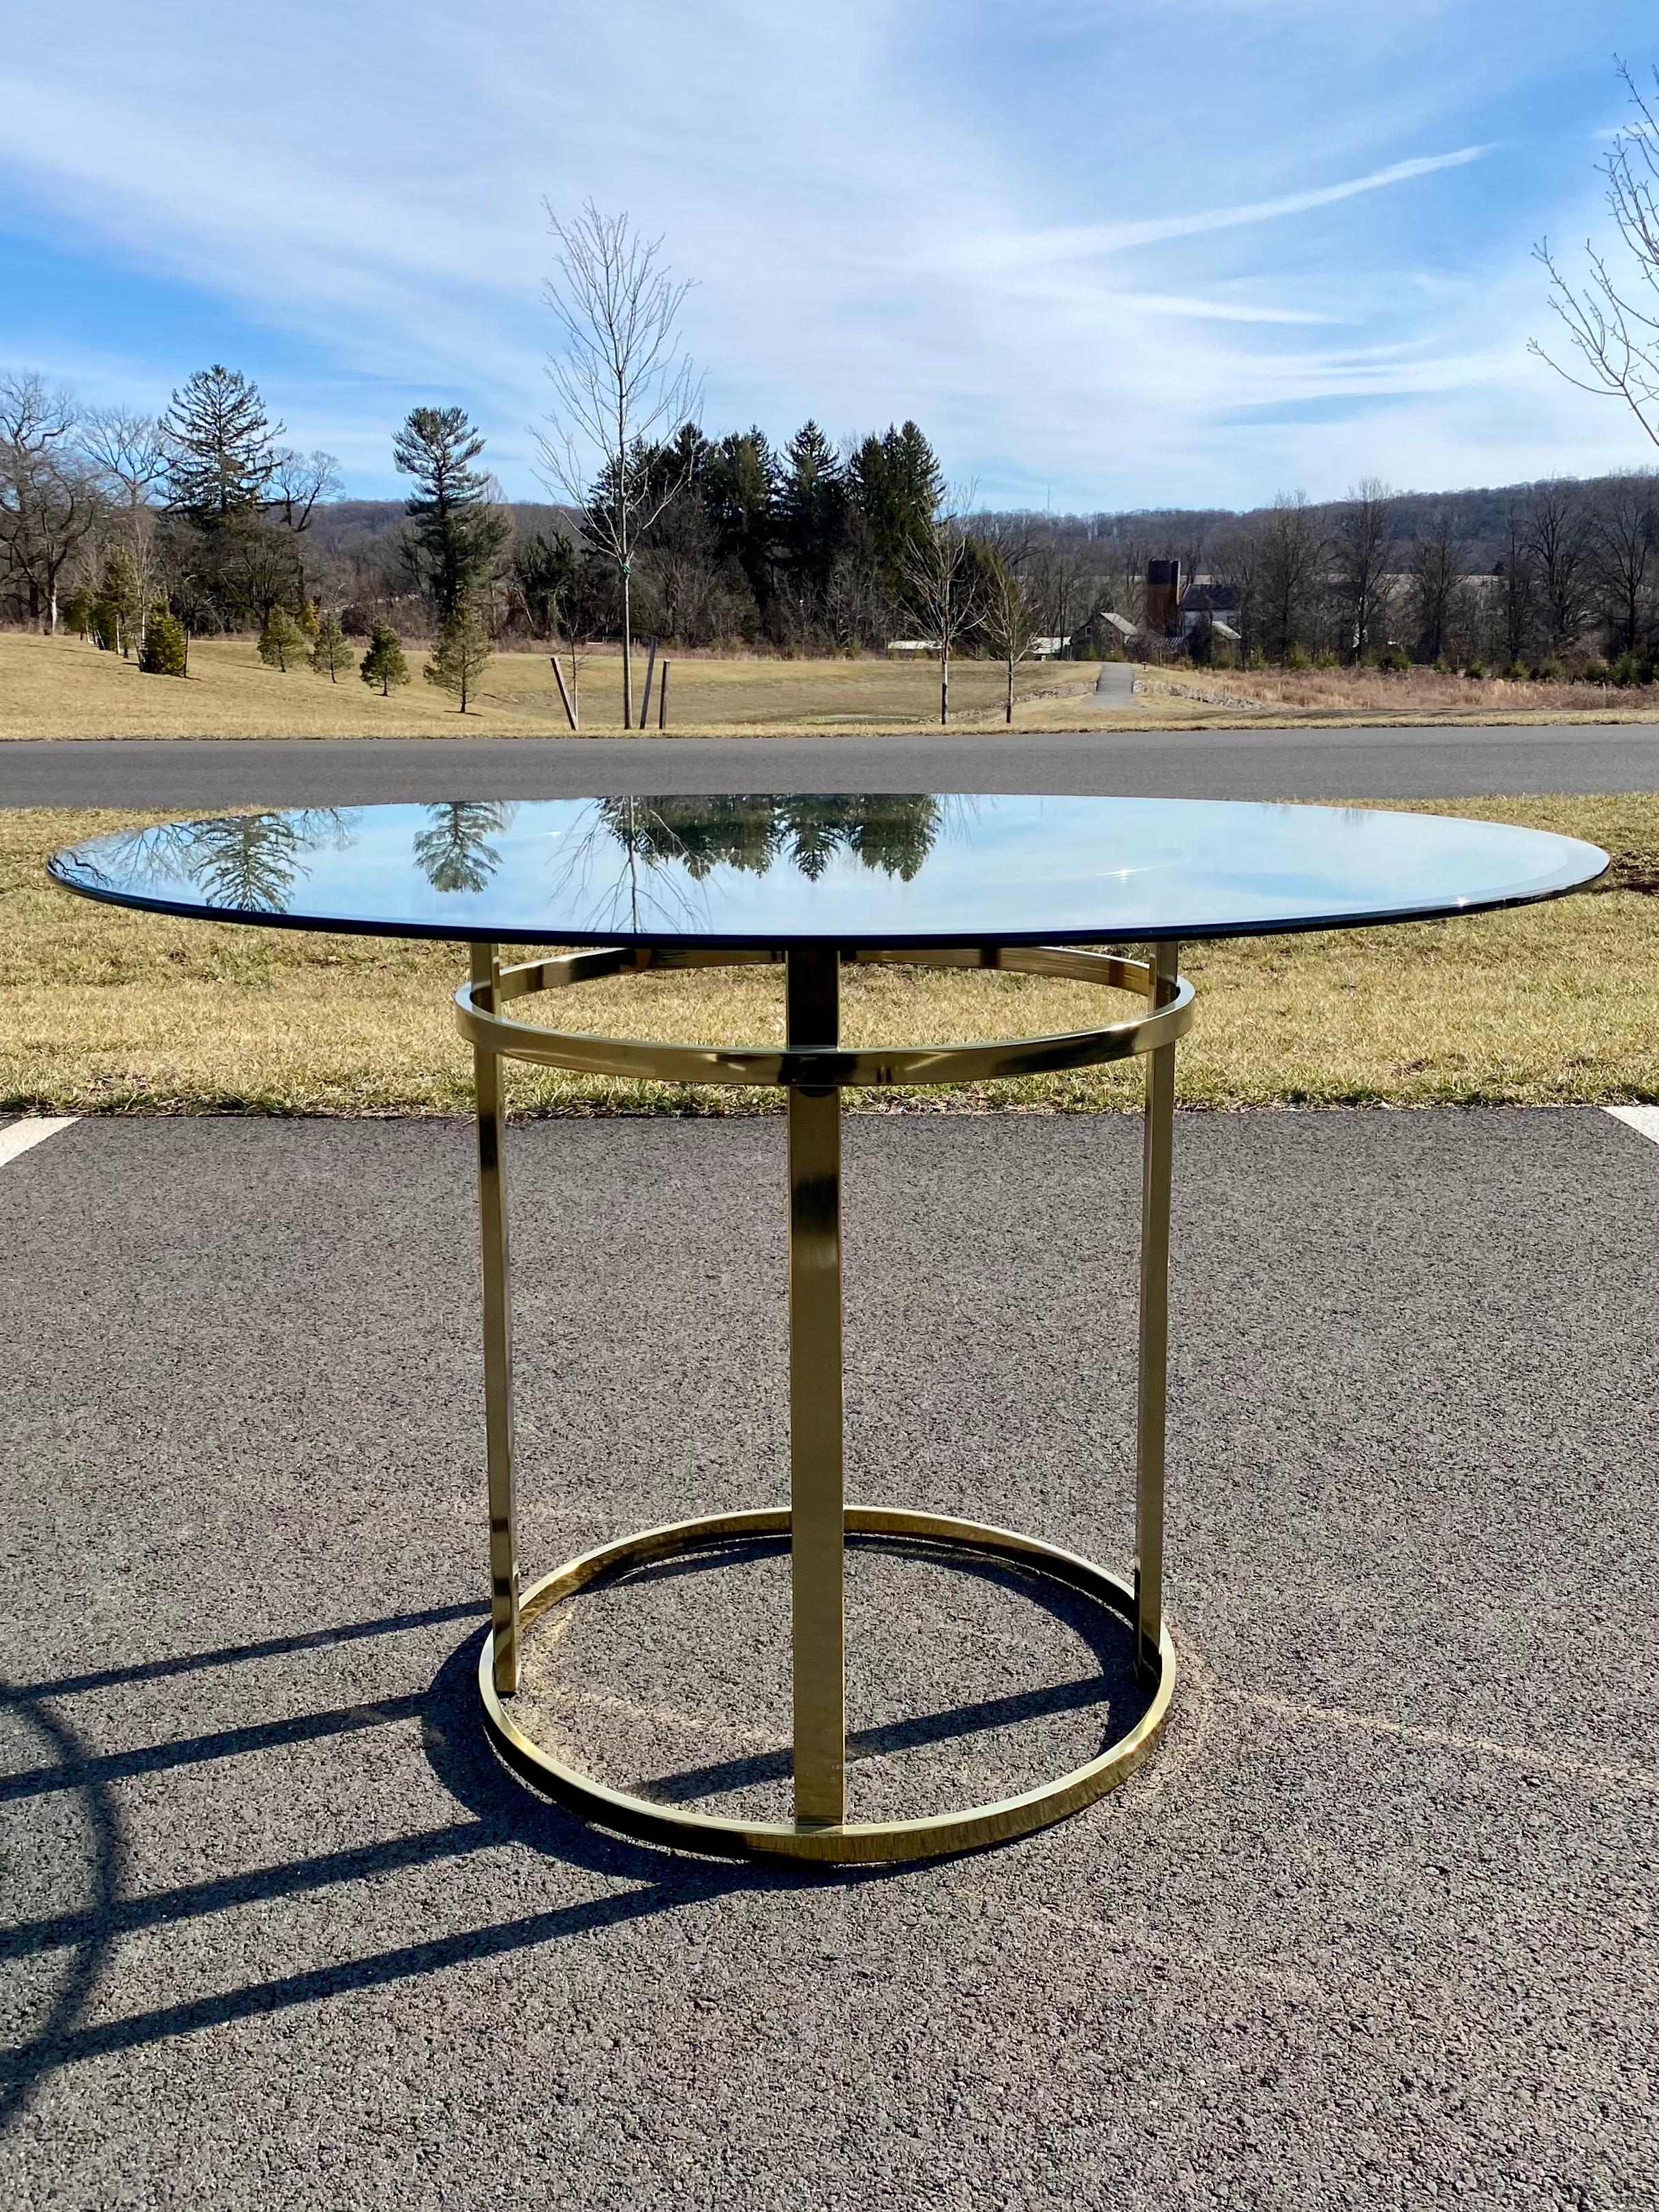 Mid-Century Modern brass and glass round dining or center hall table. Sleek style of Milo Baughman circa 1970s-1980s. This sculptural table features a shiny brass gold tone metal base with thick 1/2 inch round beveled glass